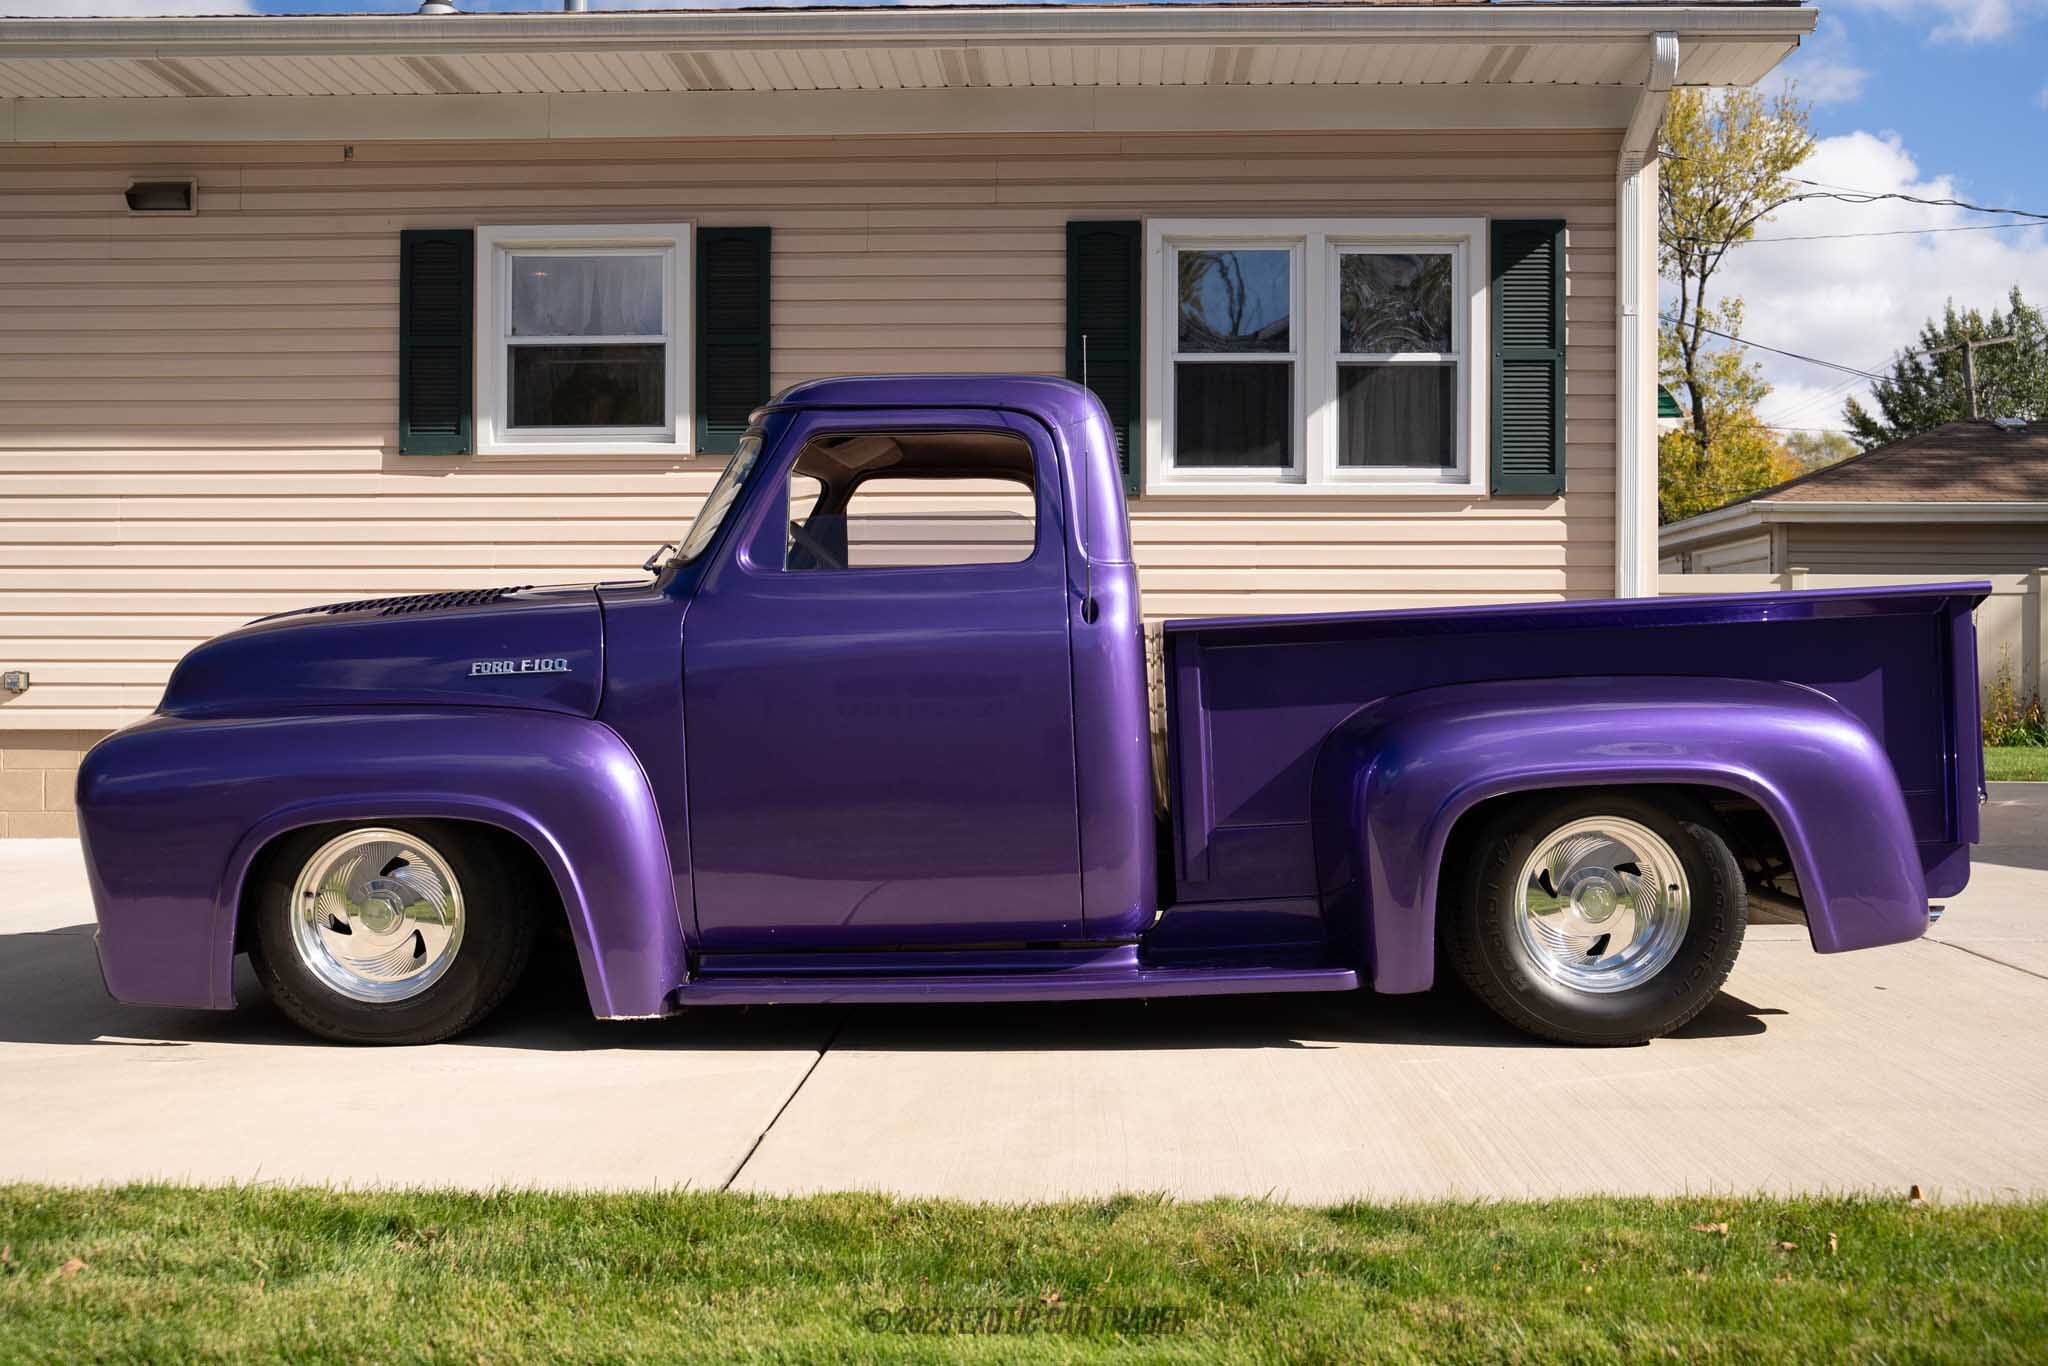 1953 Ford F-100 Custom Pickup for Sale | Exotic Car Trader (Lot #23130020)